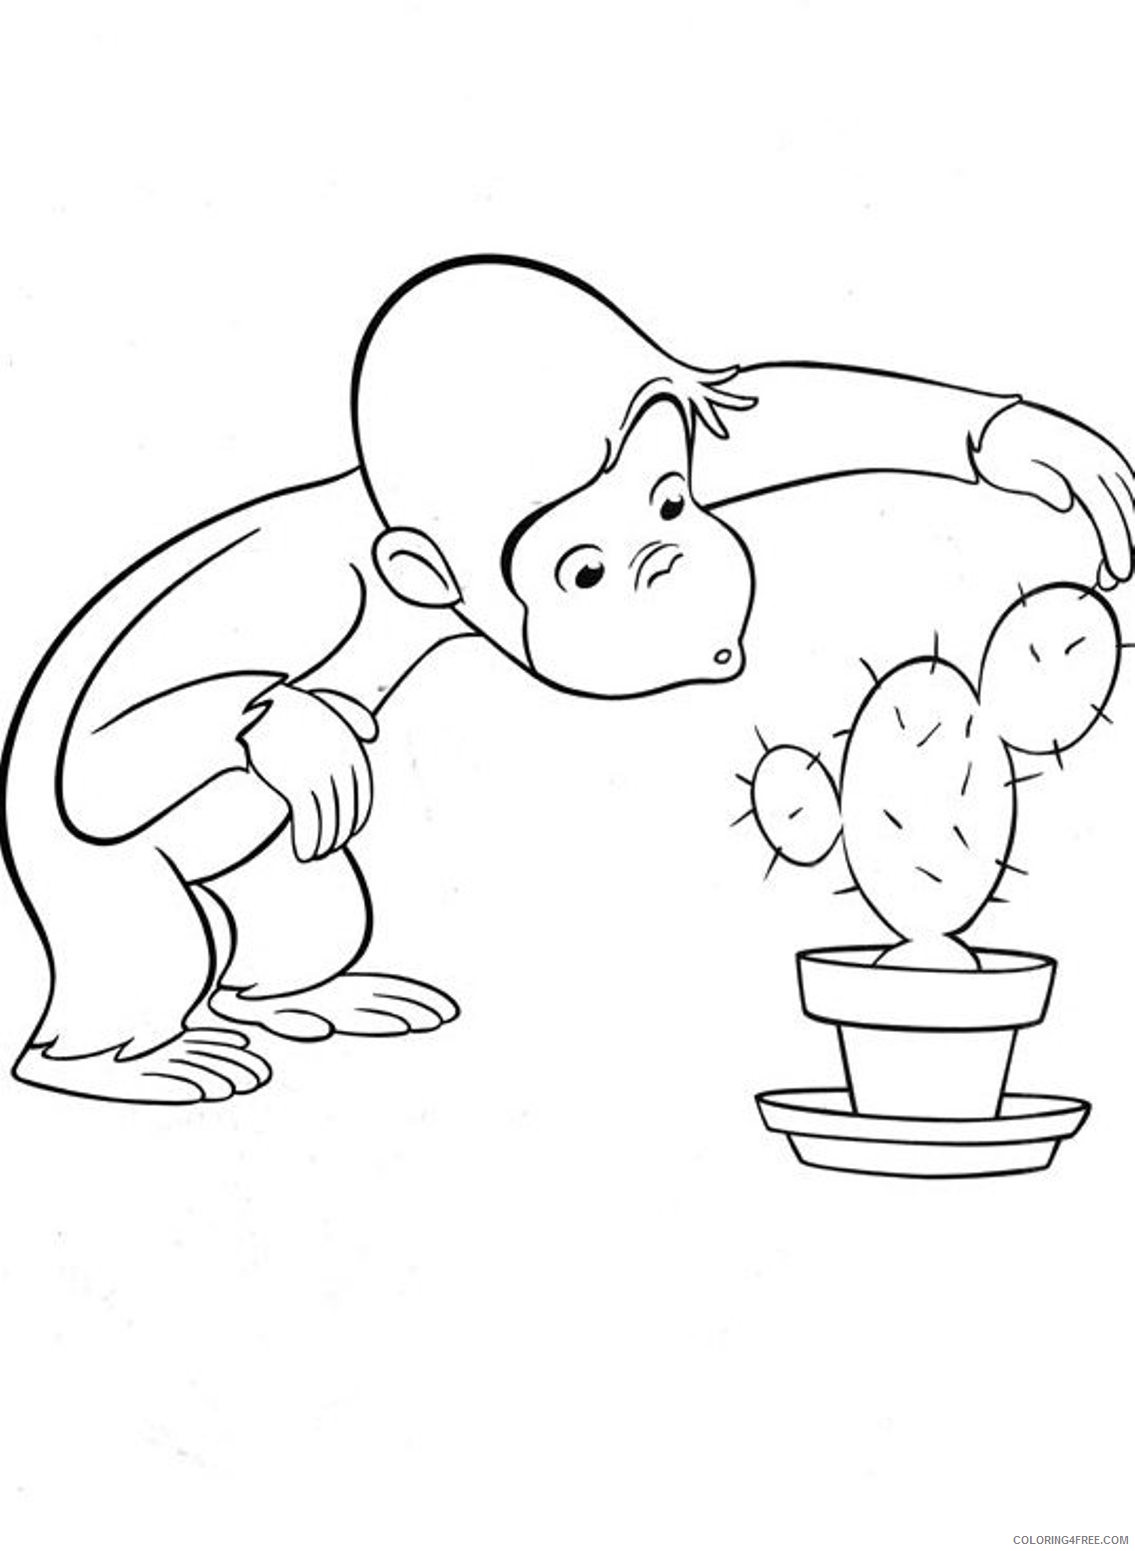 curious george coloring pages touching cactus Coloring4free